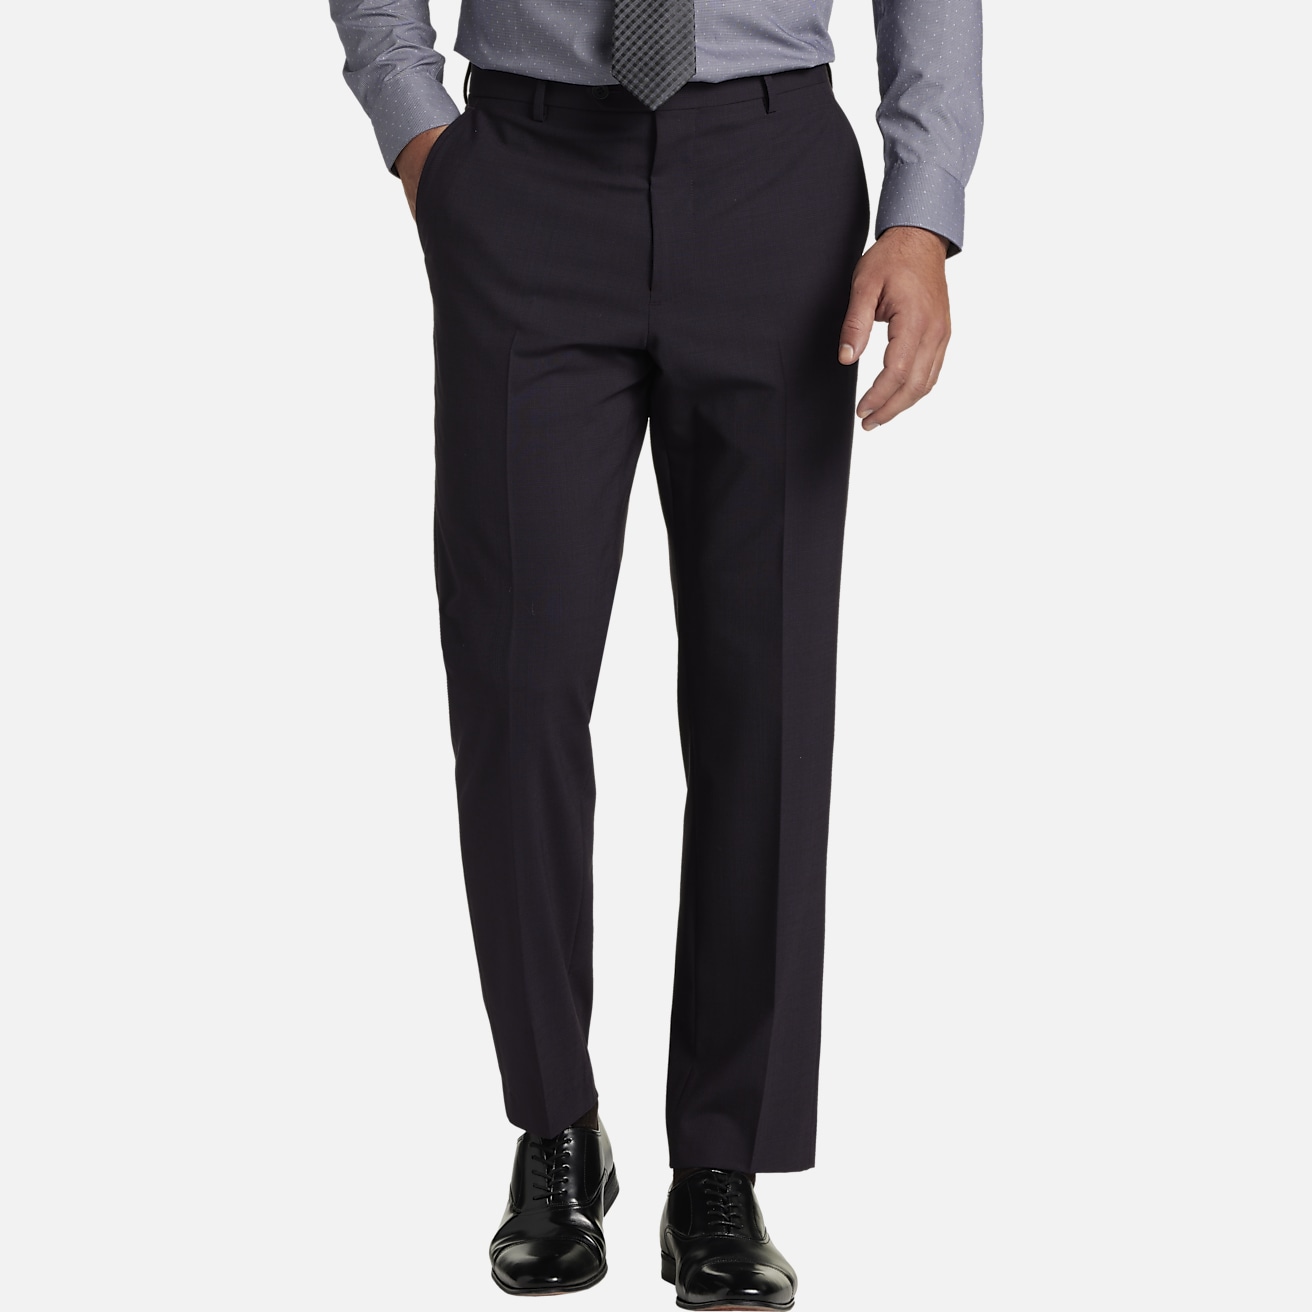 https://image.menswearhouse.com/is/image/TMW/TMW_3Y3U_60_AWEARNESS_KENNETH_COLE_SUIT_SEPARATE_PANTS_DARK_PURPLE_PLAID_MAIN?imPolicy=pdp-mob-2x